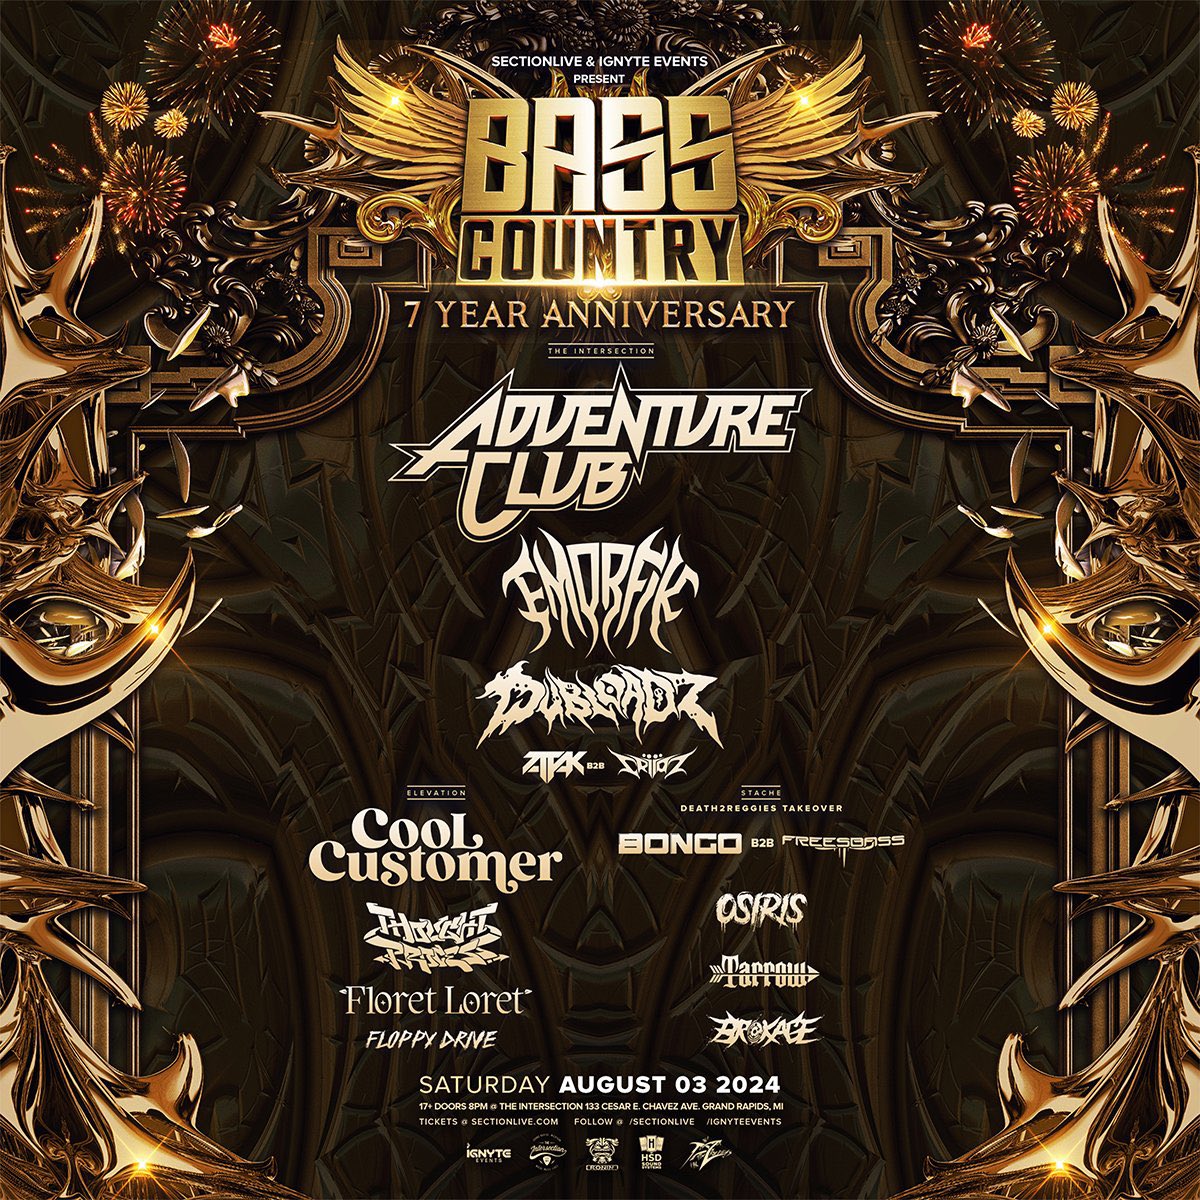 Heading to Michigan for Bass Country in August!